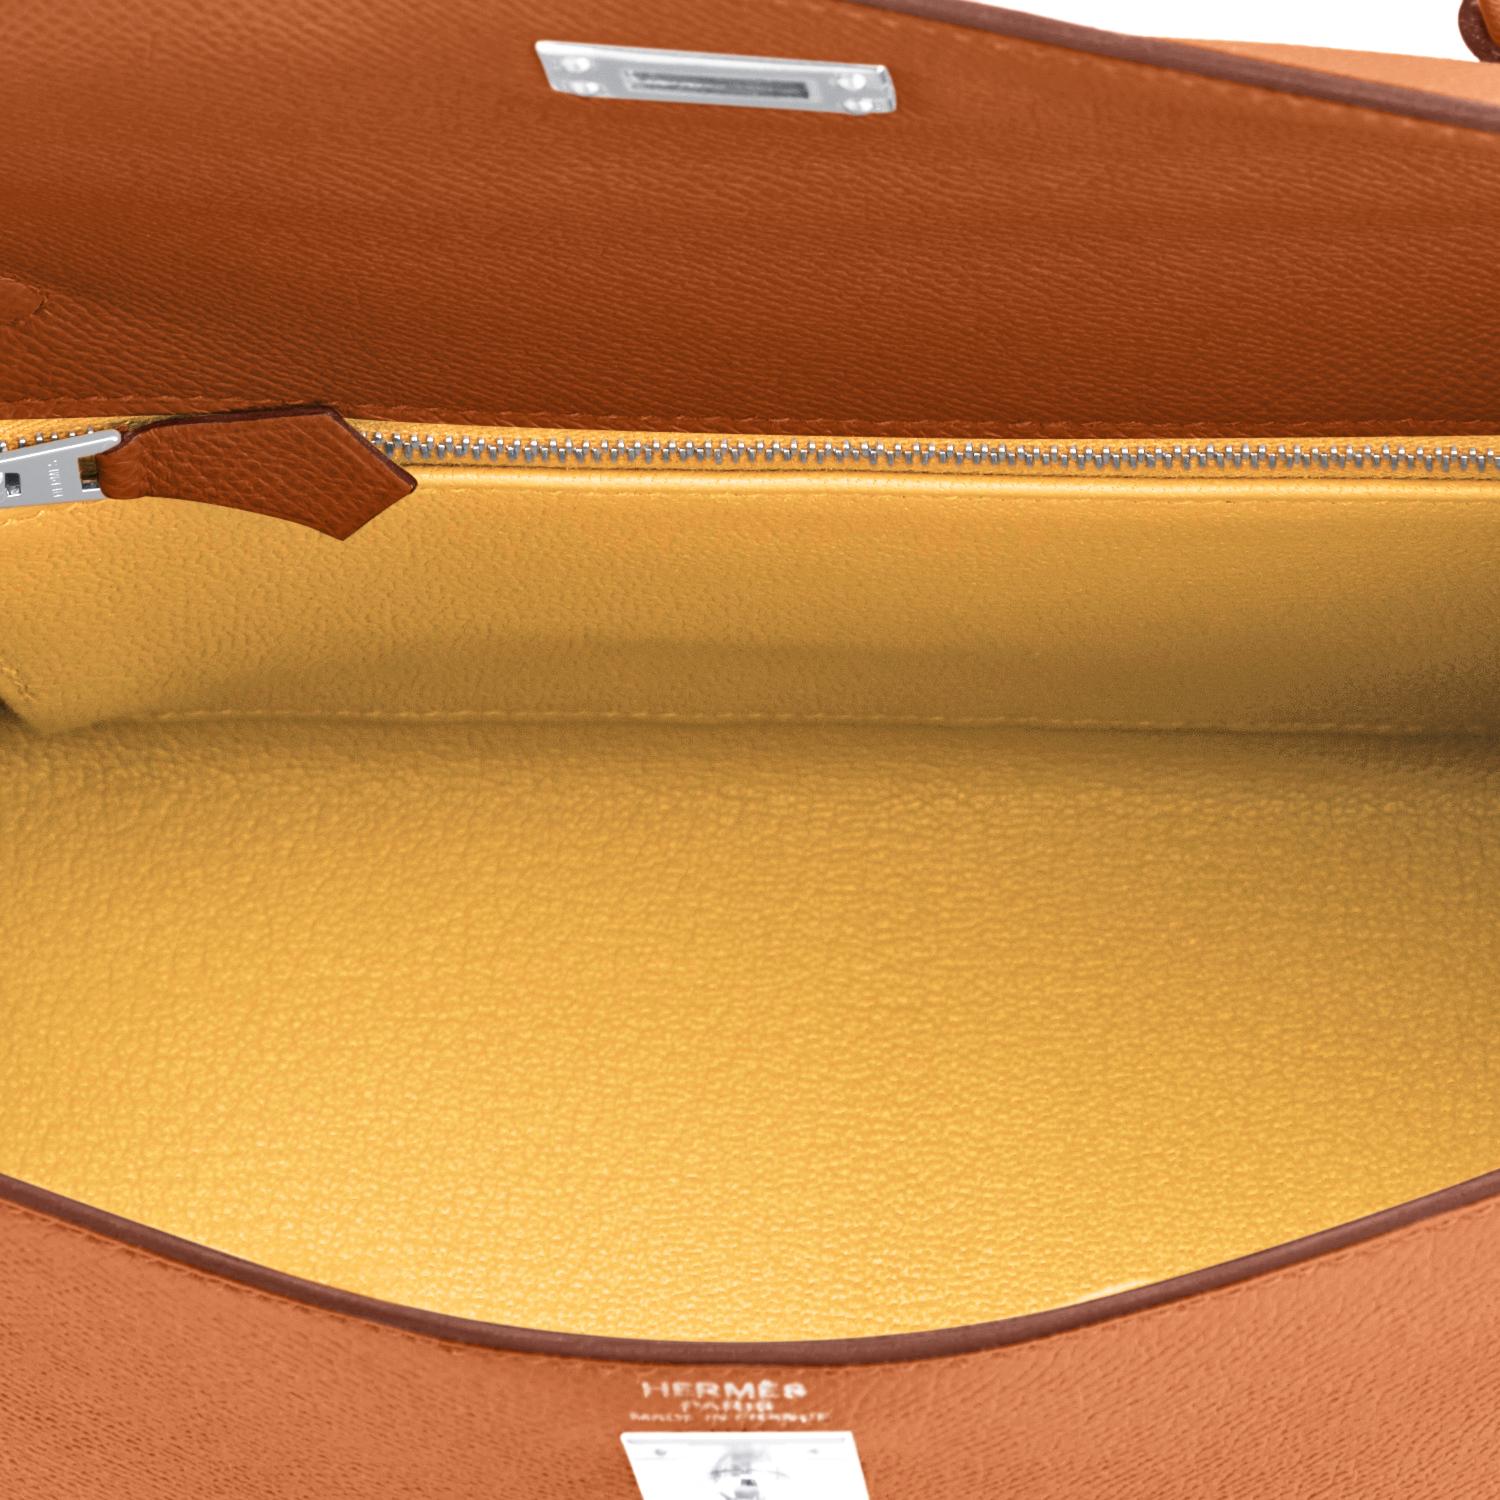 Hermes Kelly 25 Gold Bi-Color Jaune Ambre Verso Shoulder Bag Bag Z Stamp, 2021
A rare and coveted Kelly 25cm combining two of Hermes' best colors, Gold and Jaune Ambre!
Just purchased from Hermes store; bag bears new 2021 interior Z Stamp
Brand New